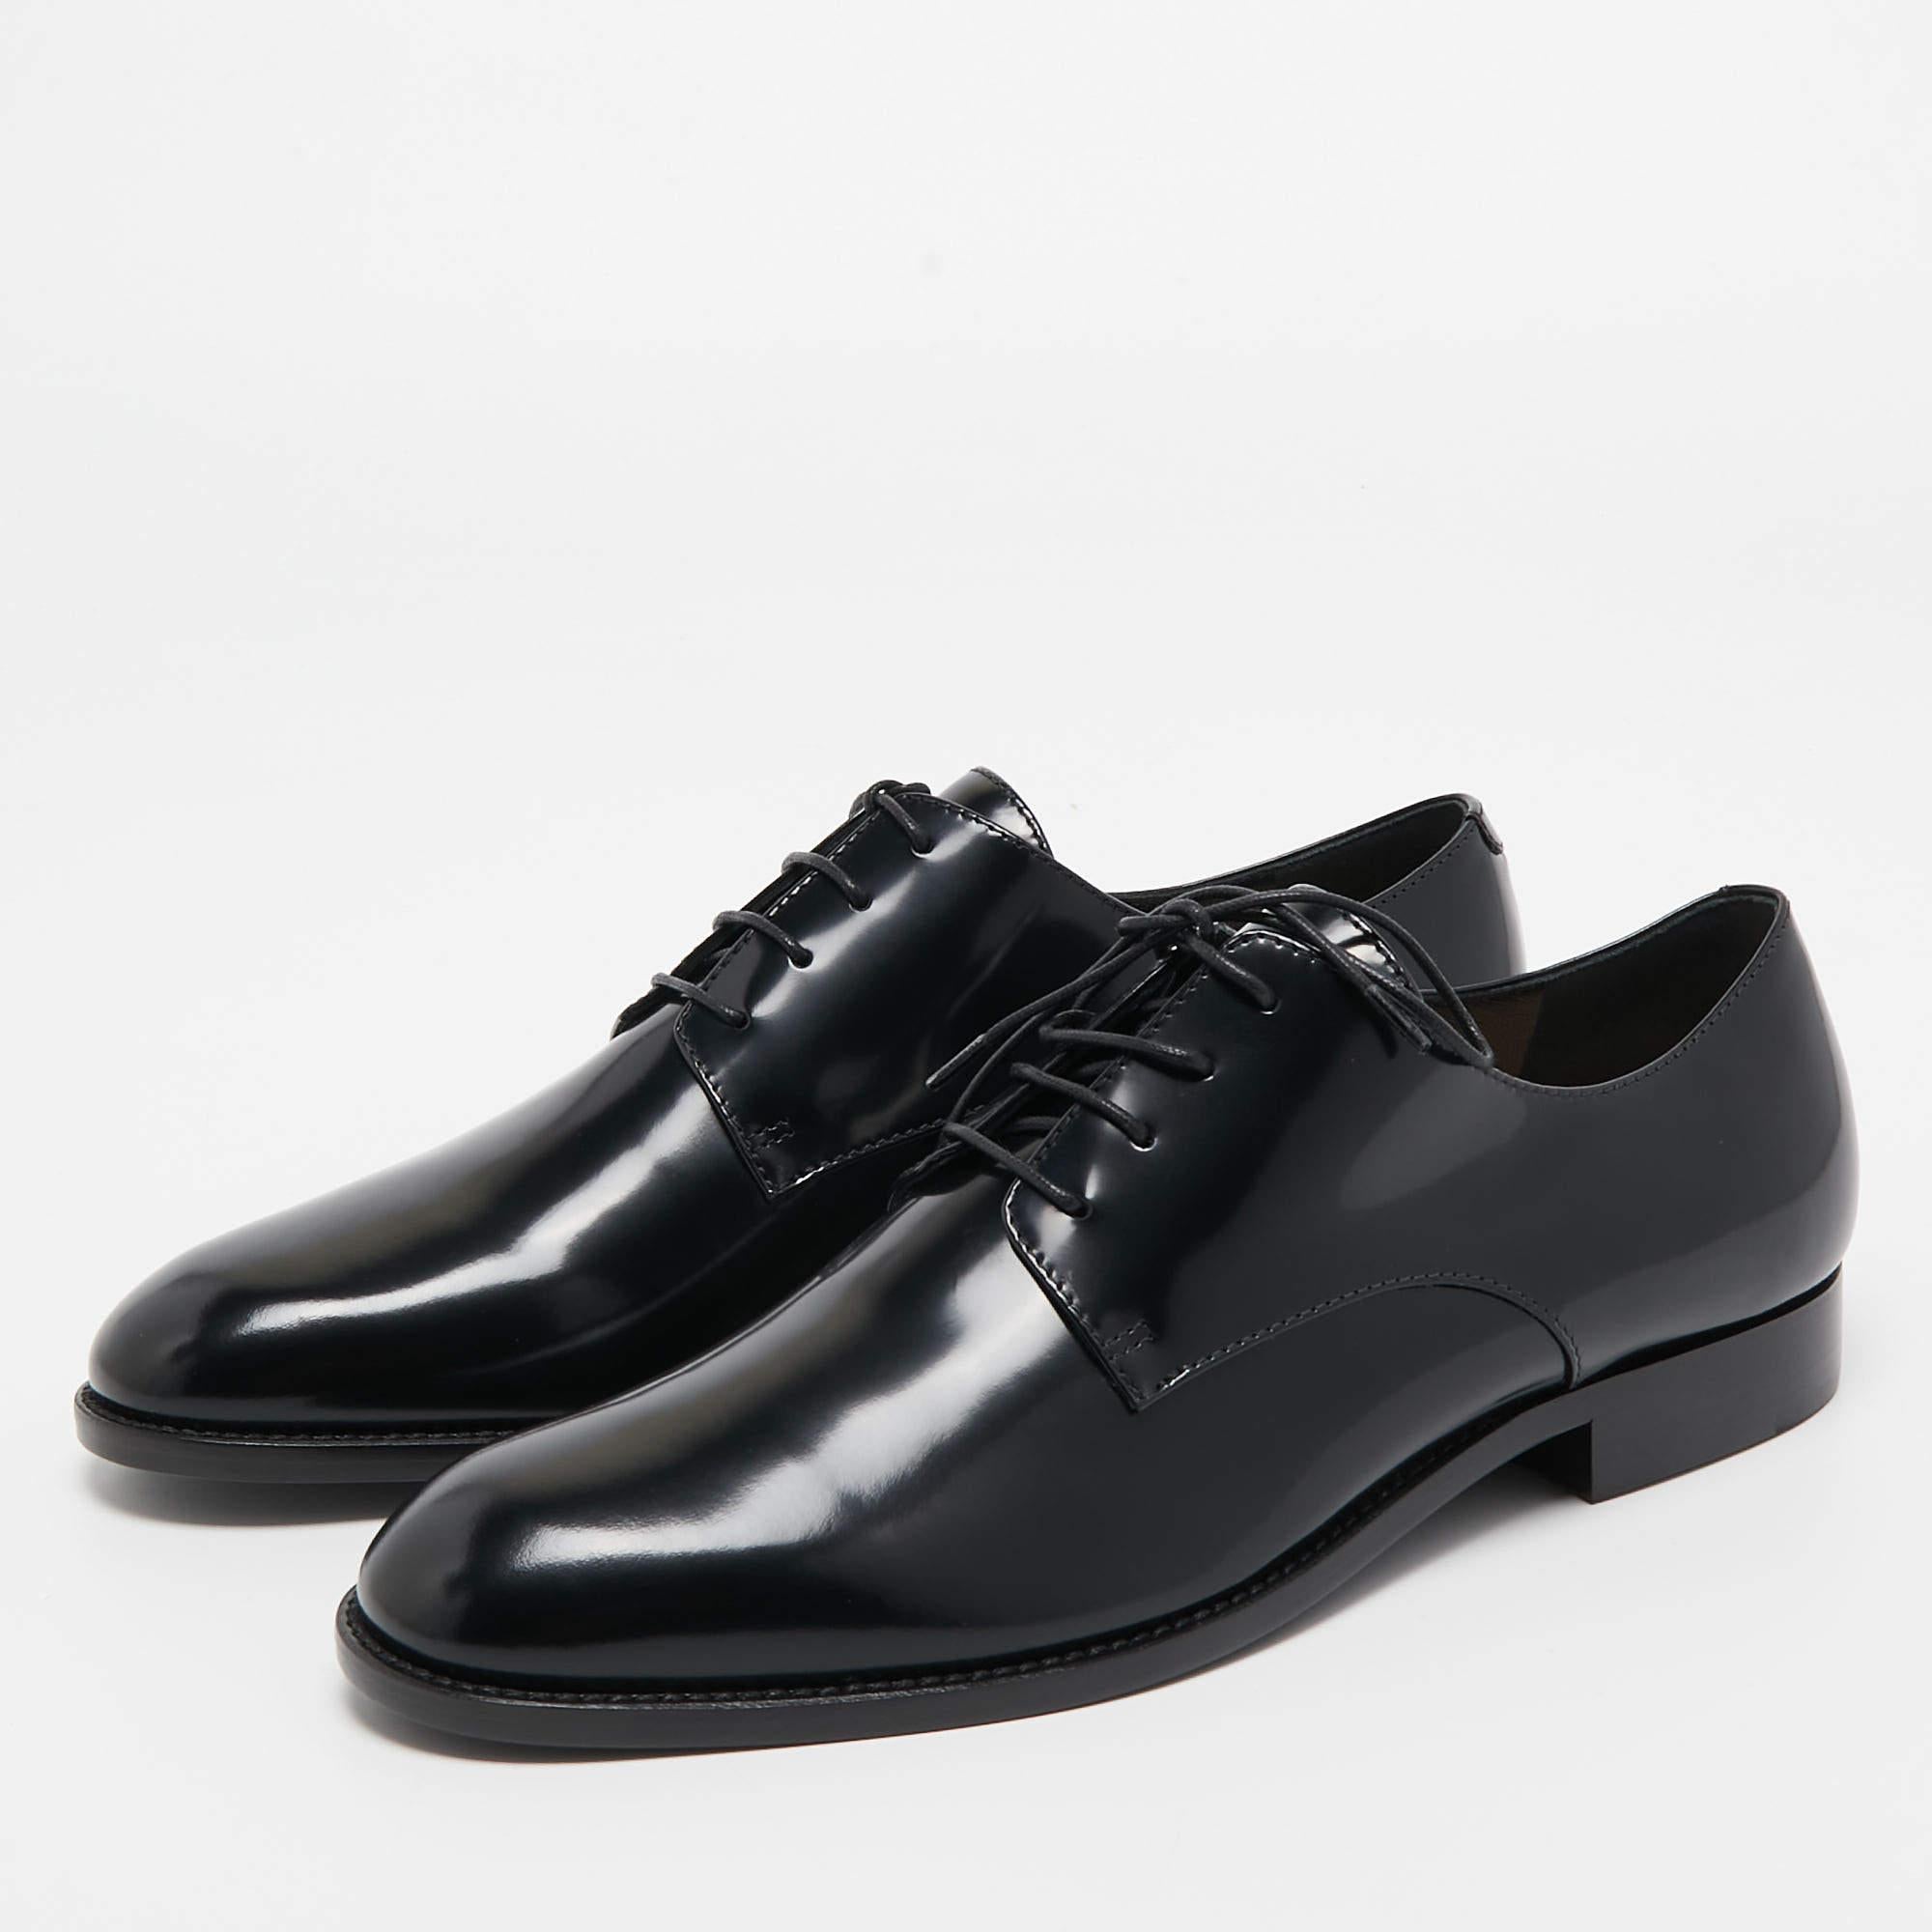 Christian Dior Black Leather Oxfords Size 37.5 1